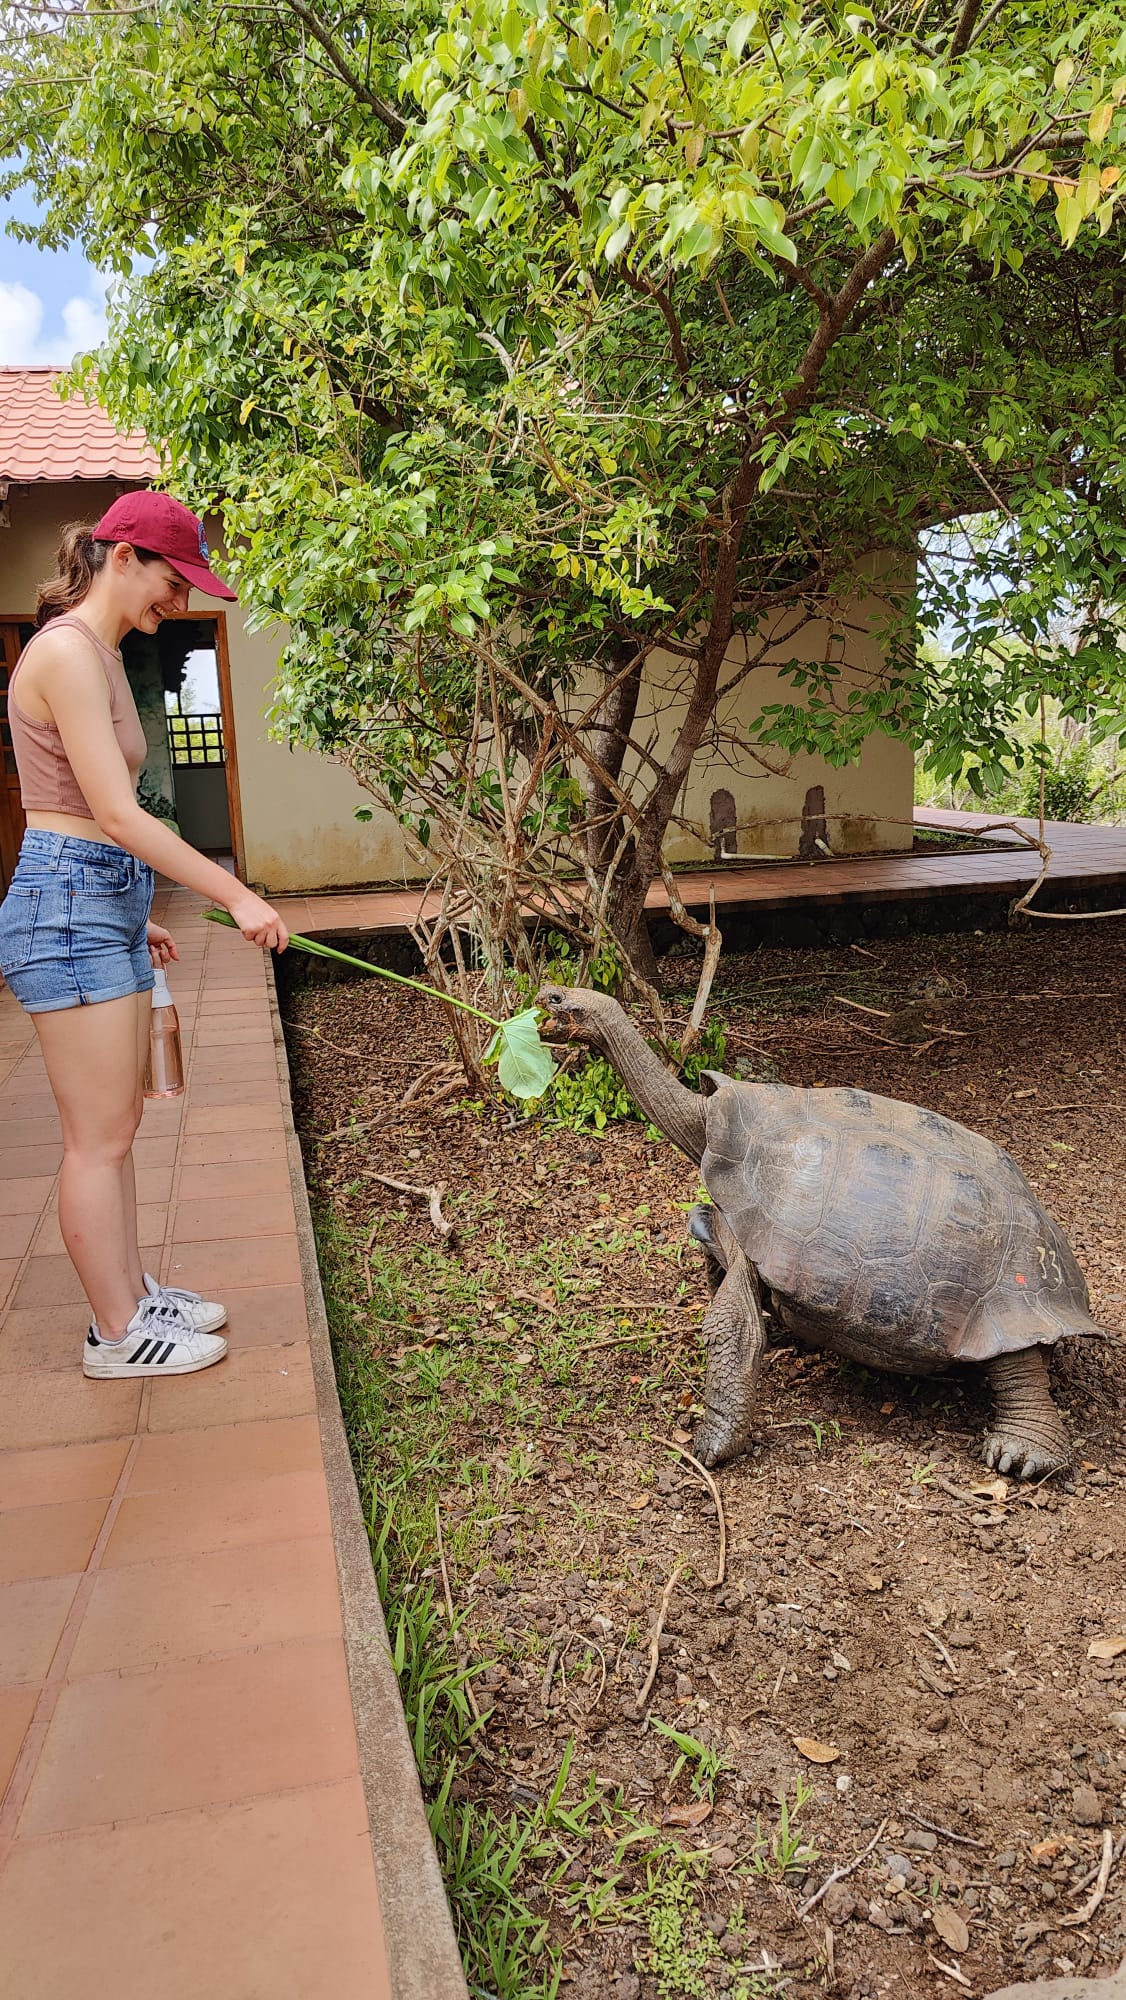 Pictured is me feeding a giant leaf to a tortoise. In the photo, the tortoise has the leaf in its mouth while I'm holding the stem and smiling at it. 